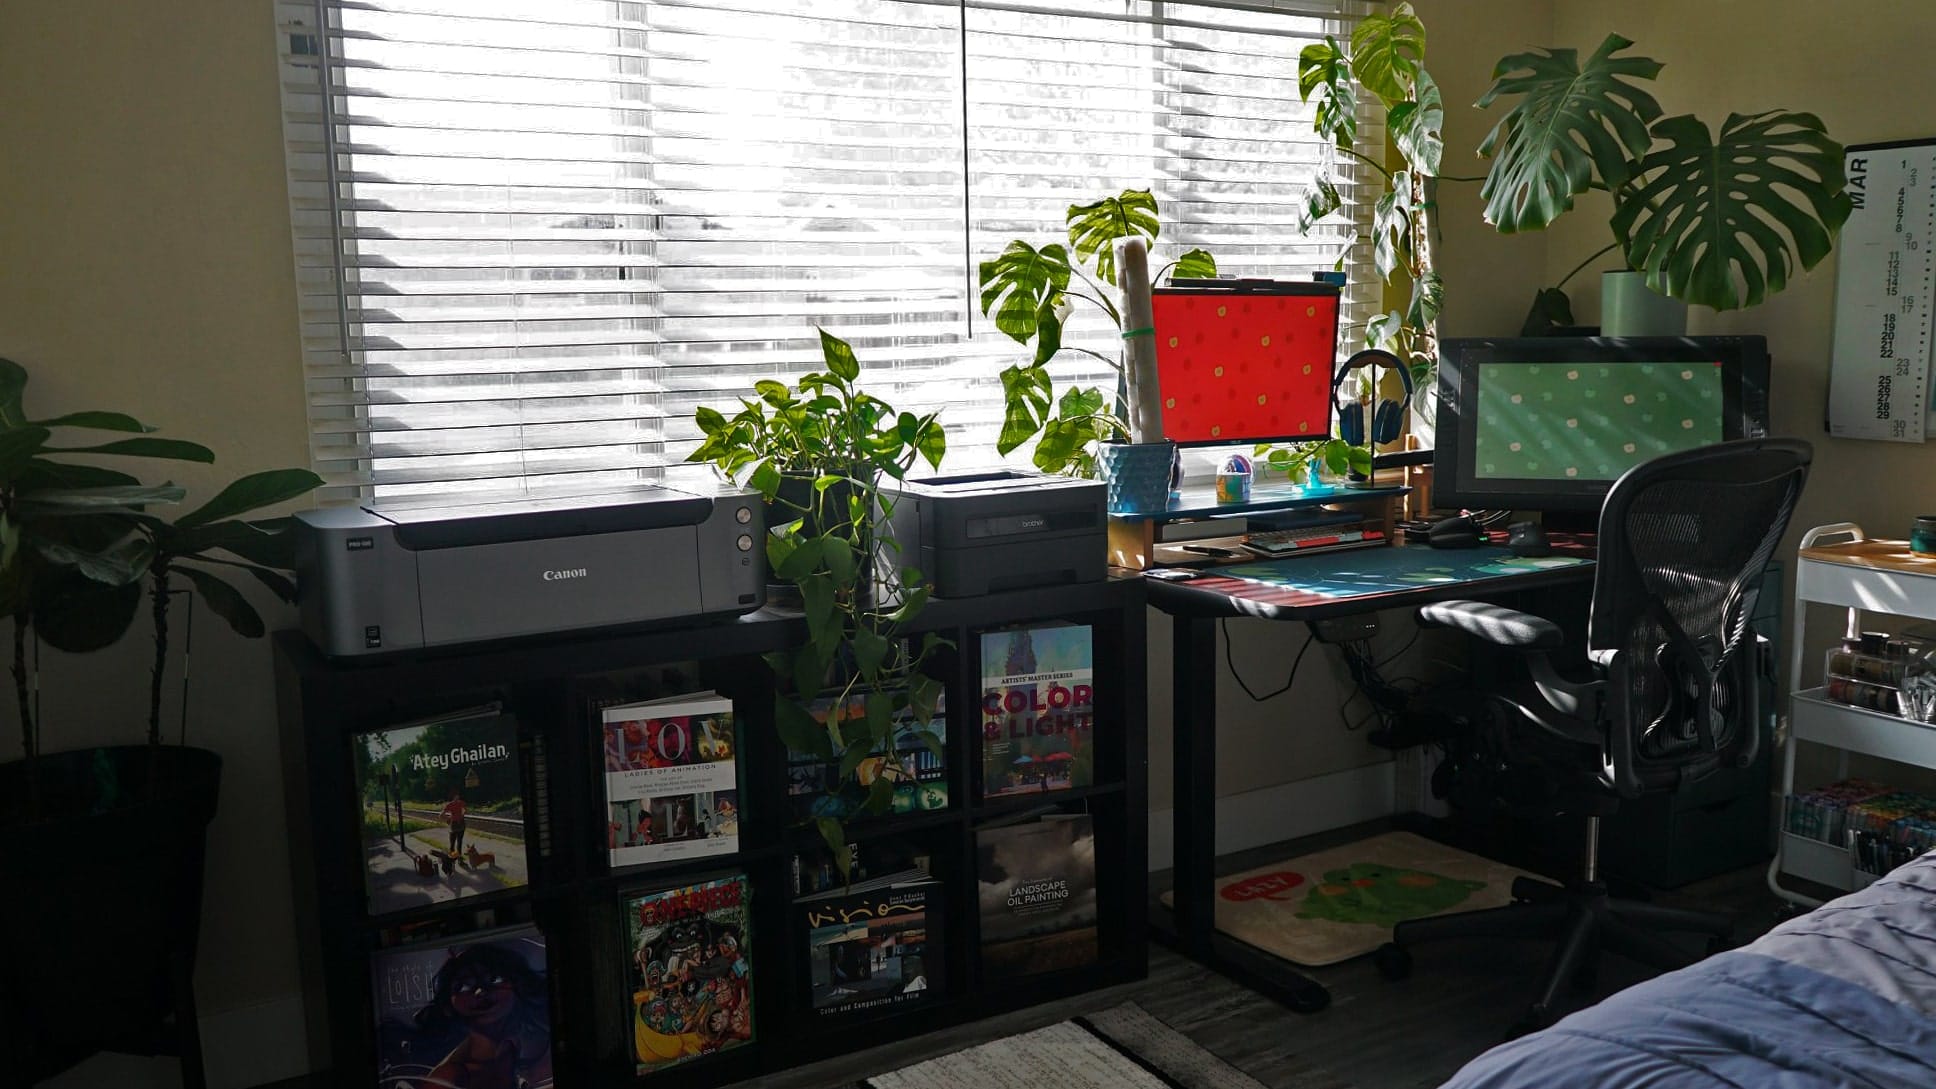 A dimly lit bedroom home office with two printers, a large monitor, indoor plants, and a bookshelf filled with art resources